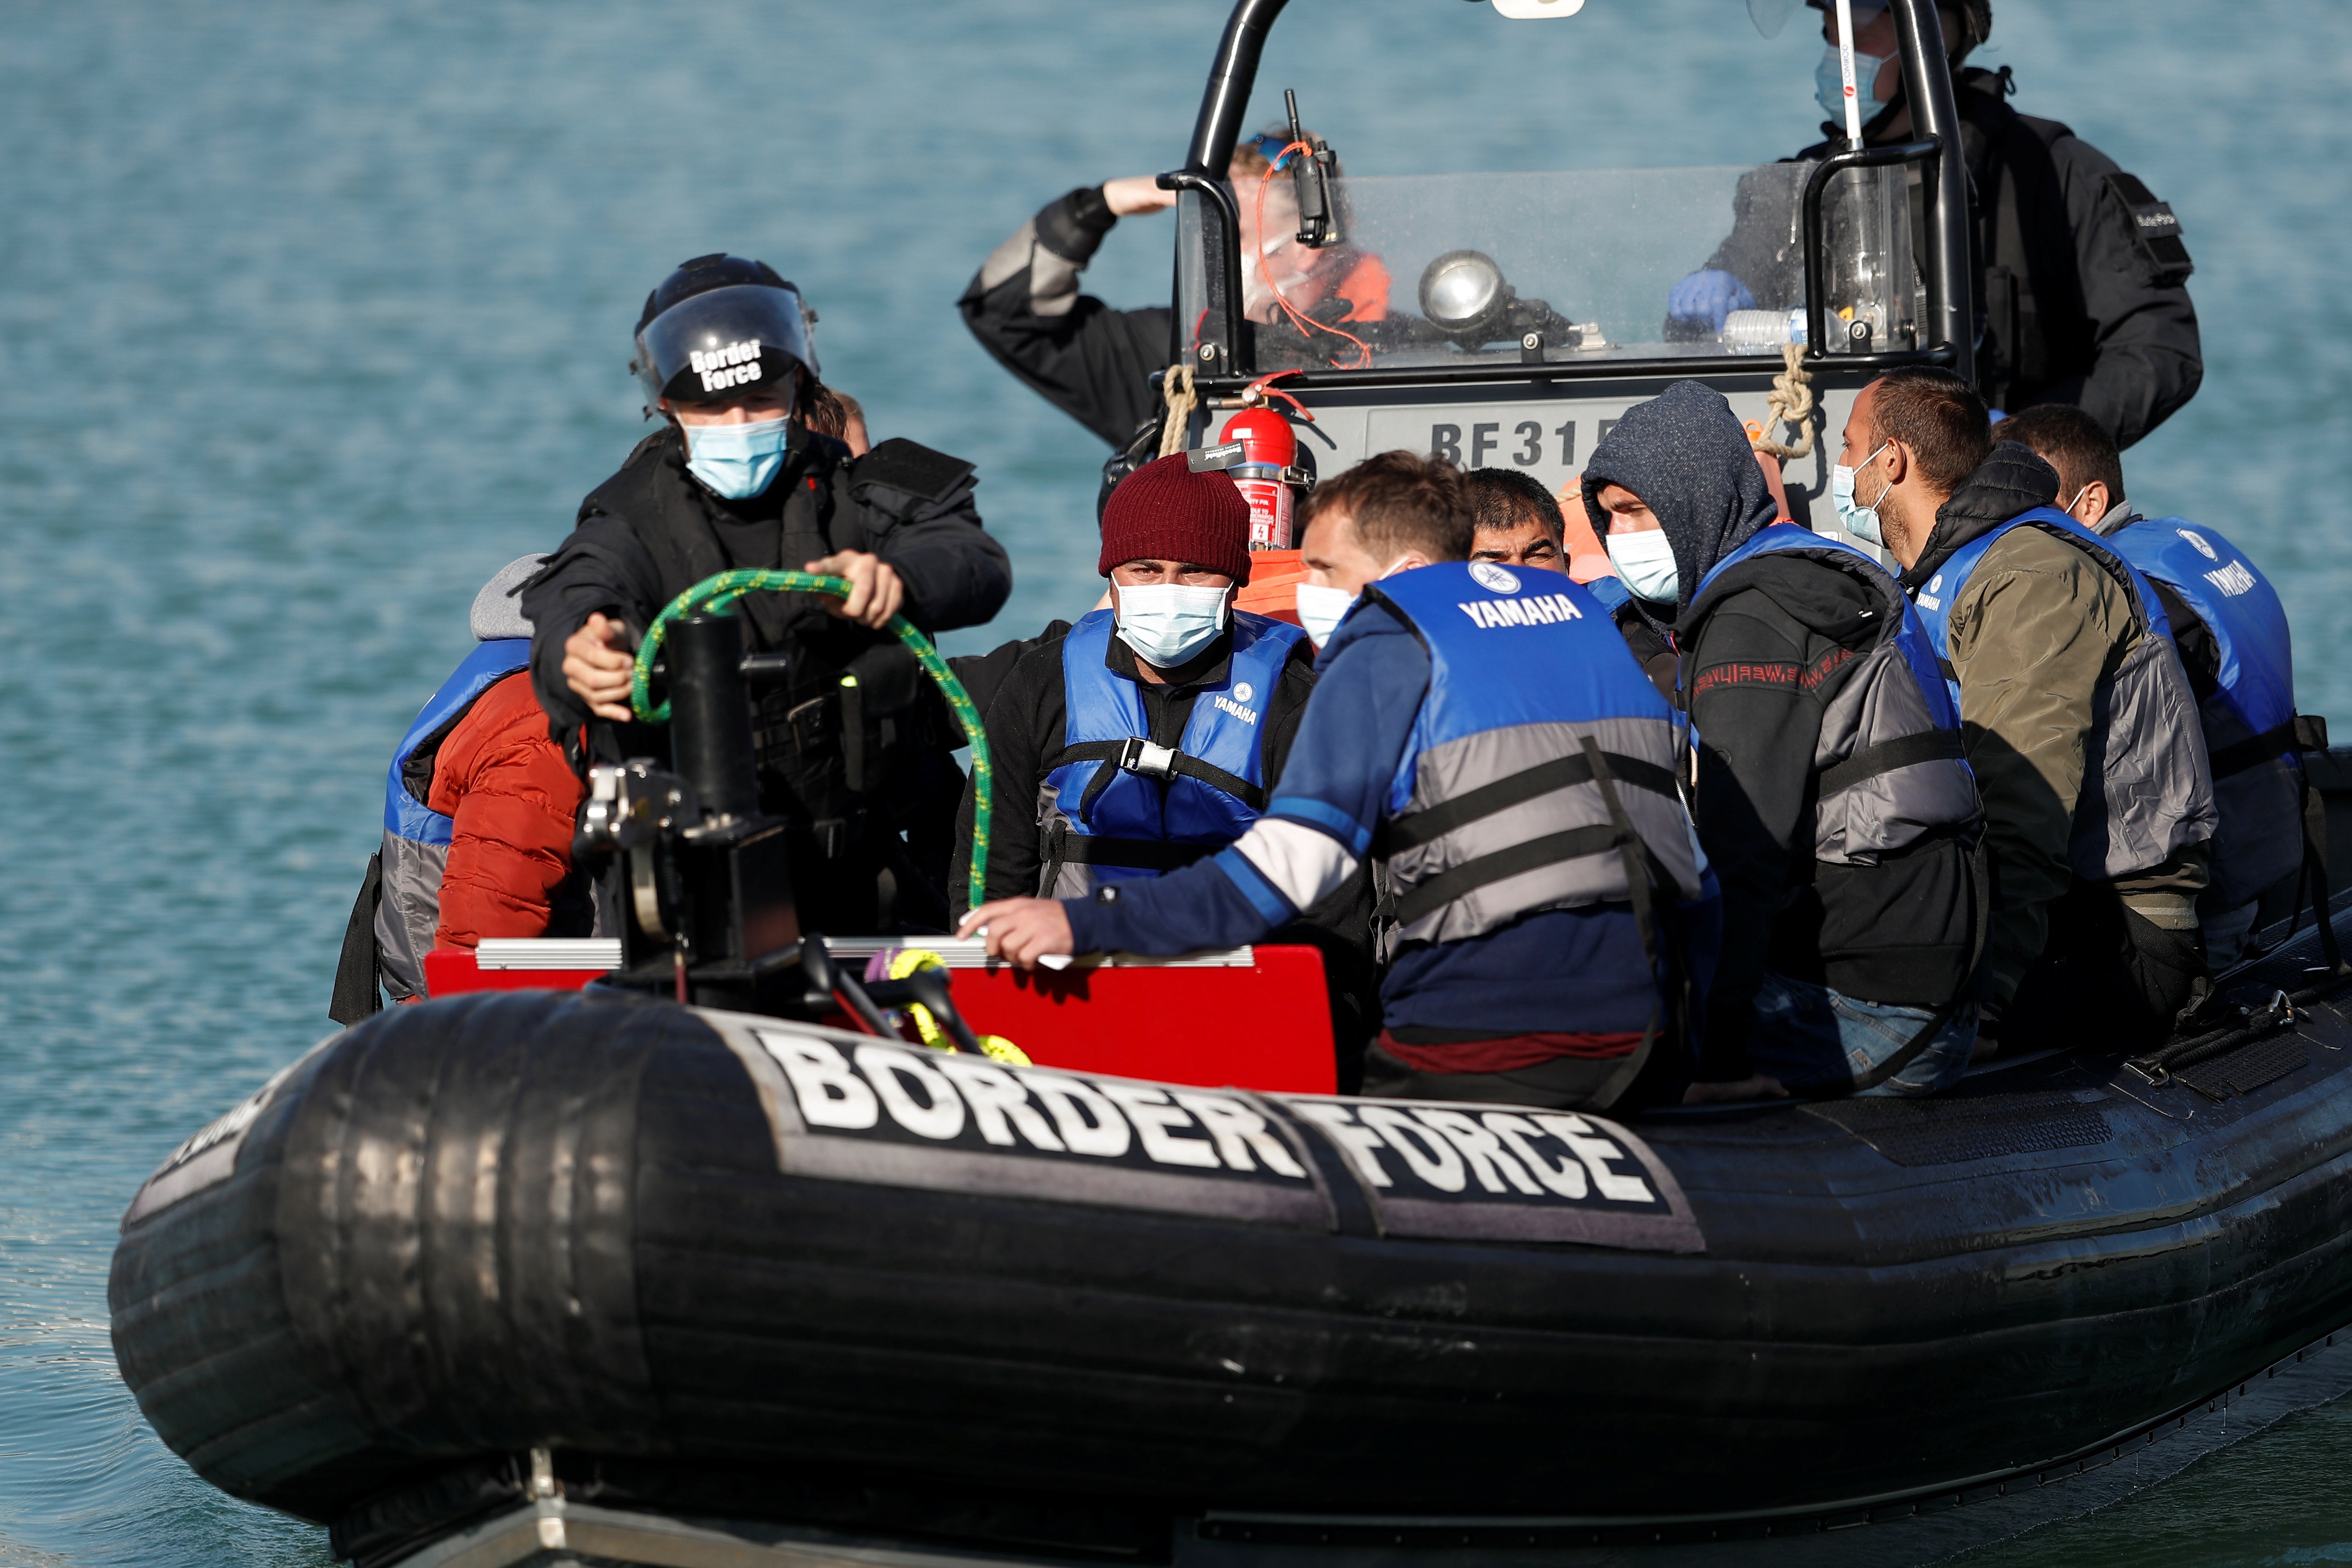 The UK agreed to provide funds to help patrol dangerous migrant crossings